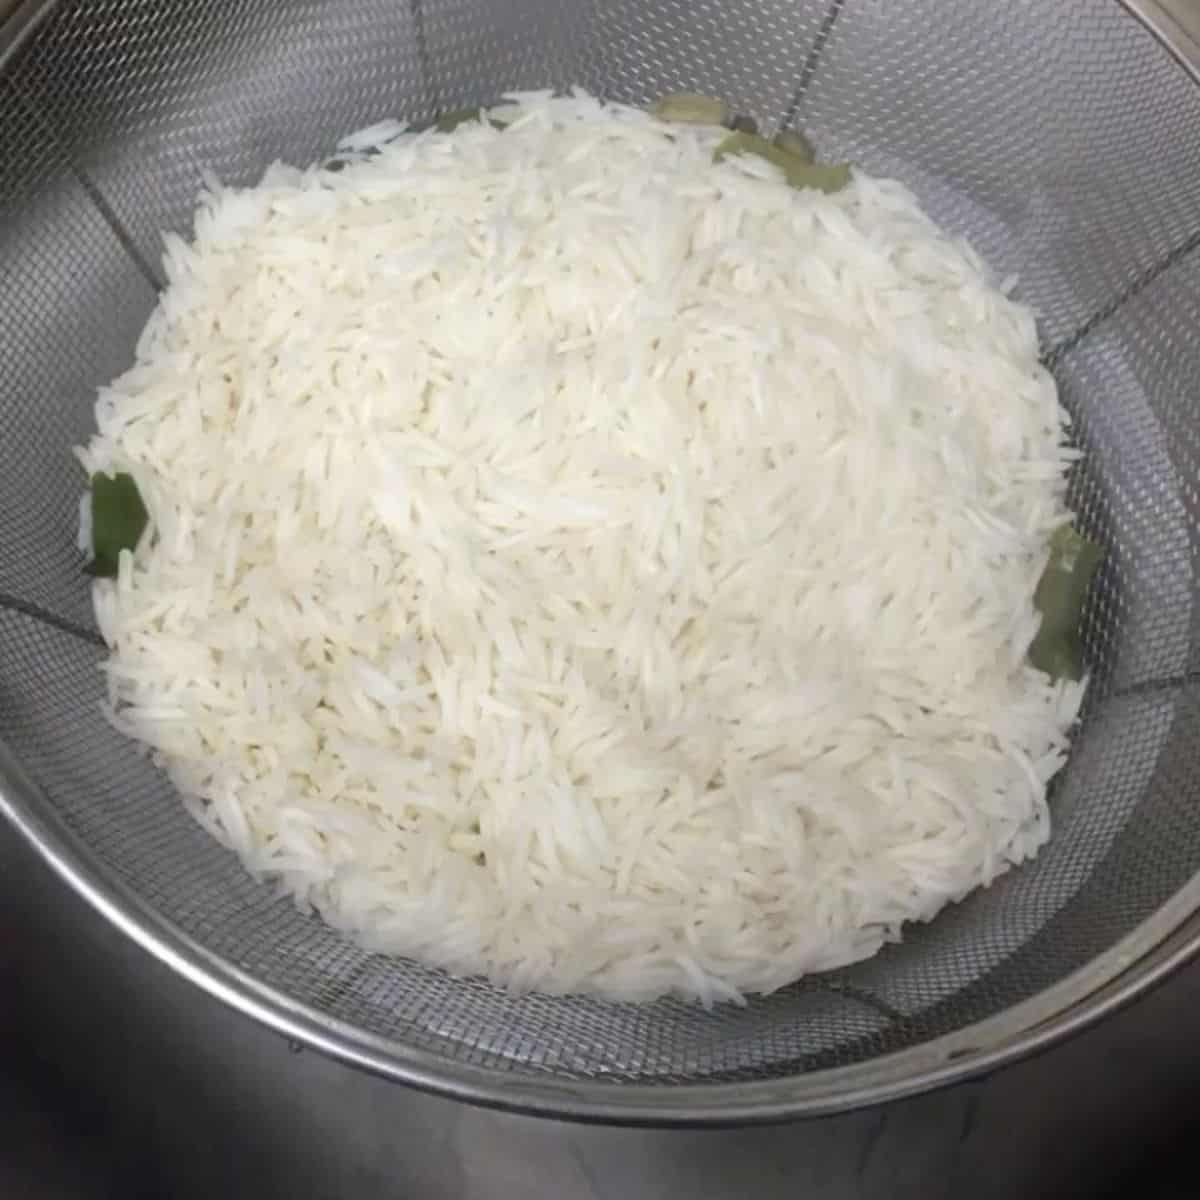 drained rice in colander